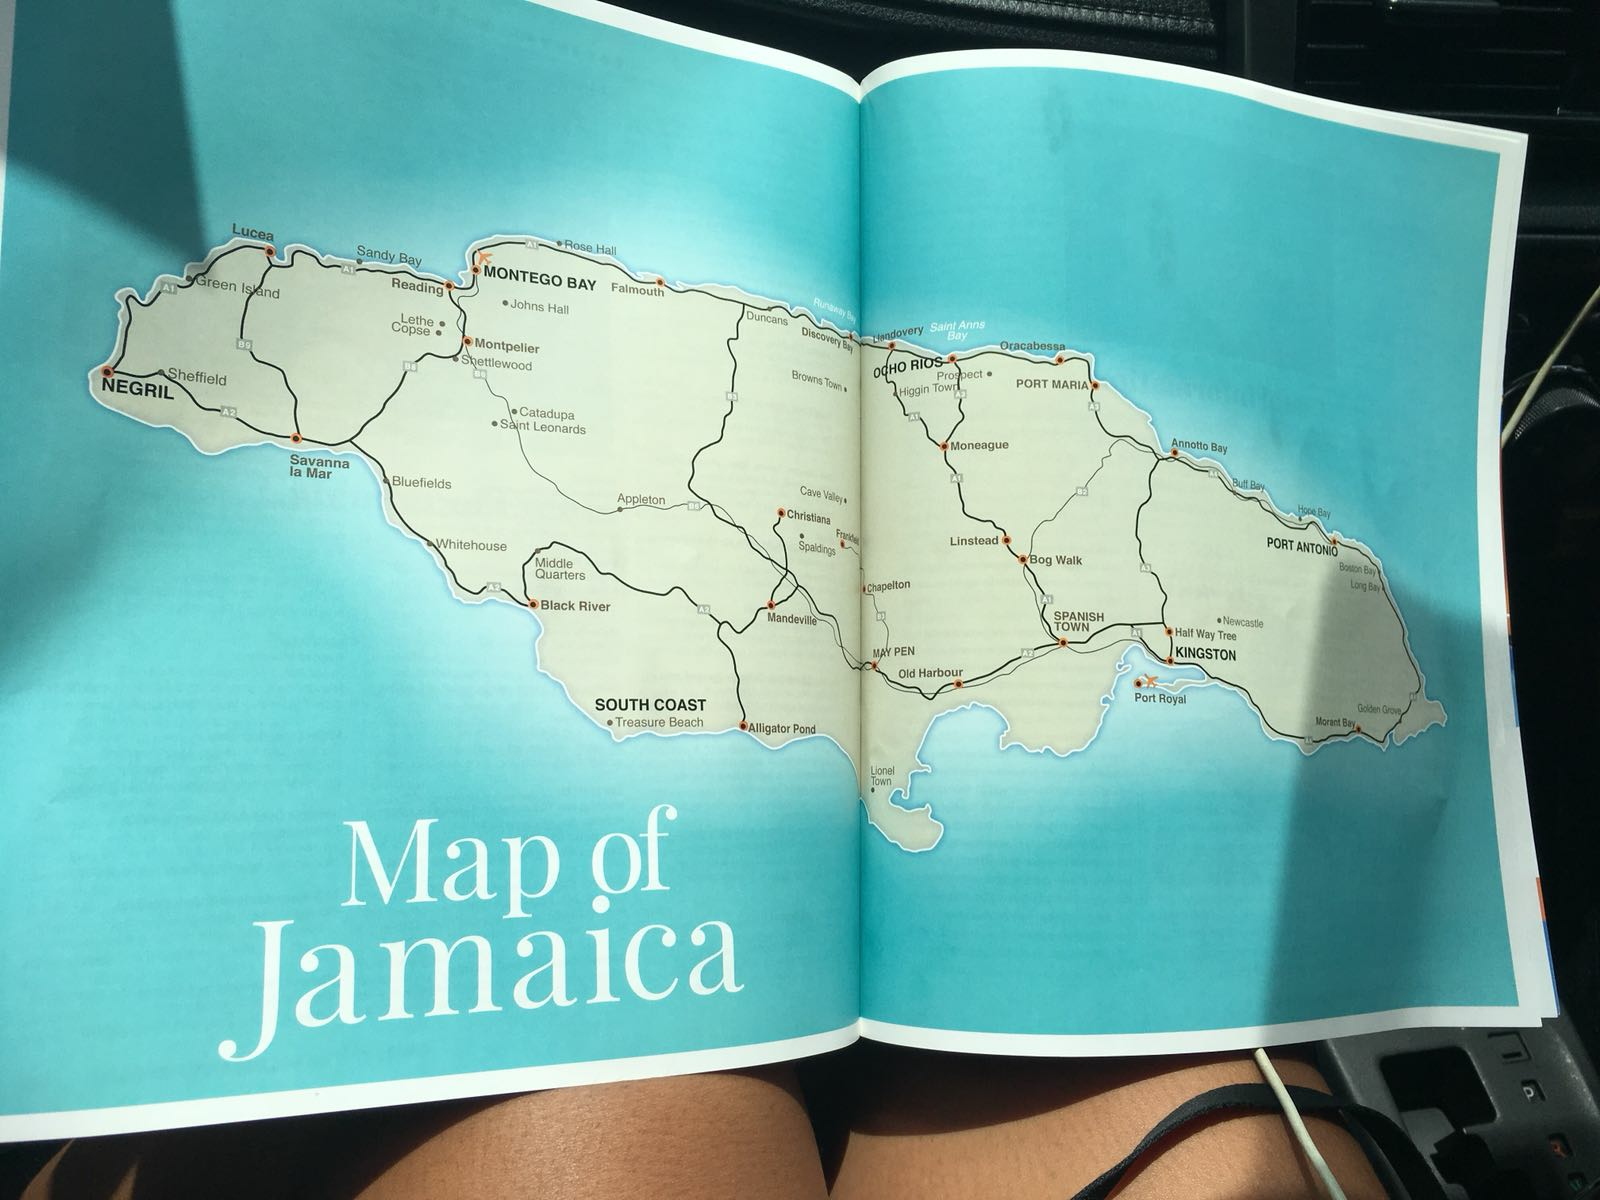 Our Couple's Getaway Guide To Negril, Jamaica - 8 Amazing Things You Can Do Here! 